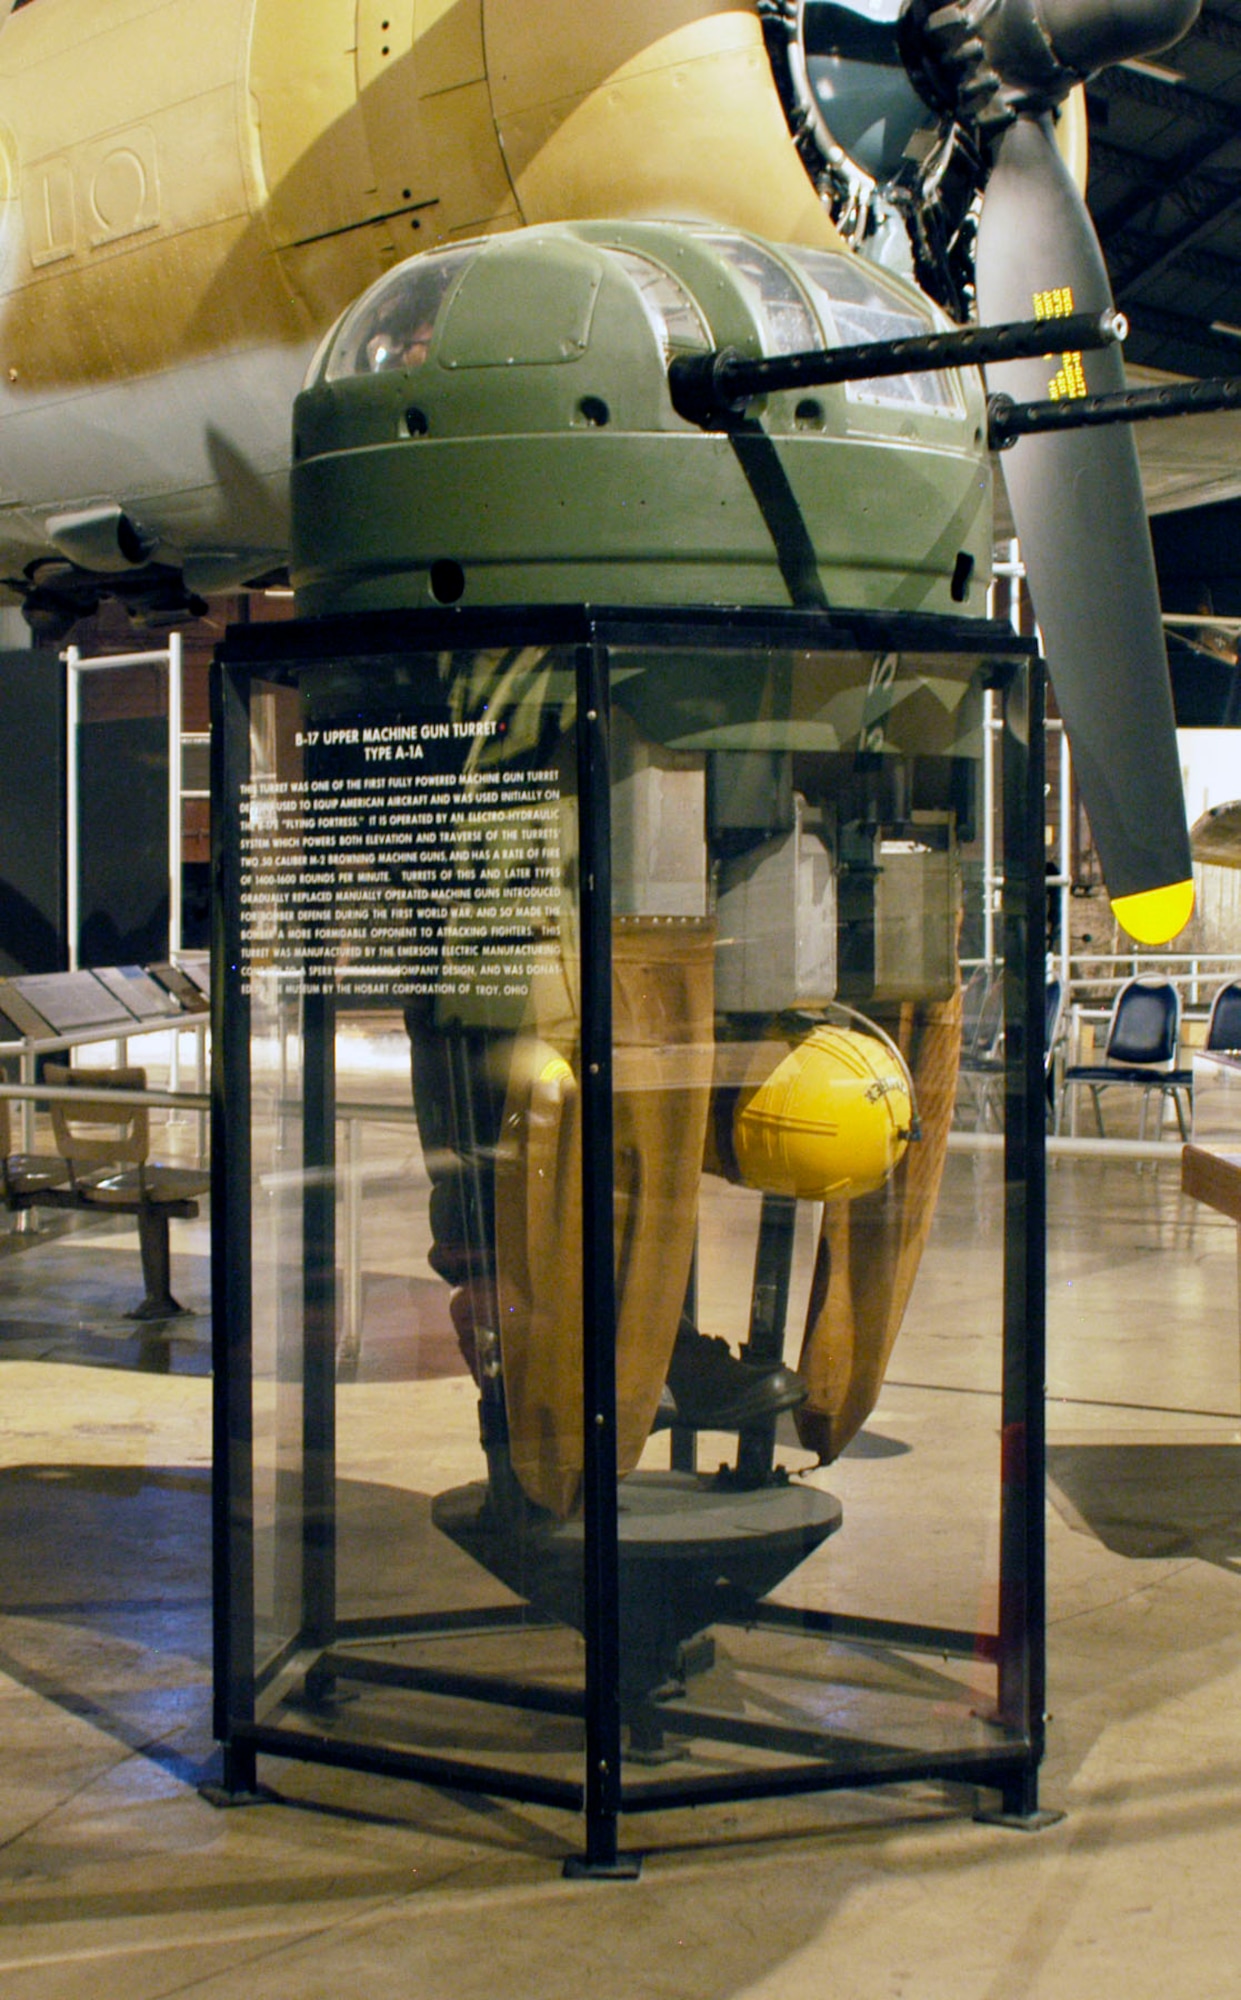 DAYTON, Ohio -- B-17 Upper Machine Gun Turret (Type A-1A) in the World War II Gallery at the National Museum of the U.S. Air Force. (U.S. Air Force photo)